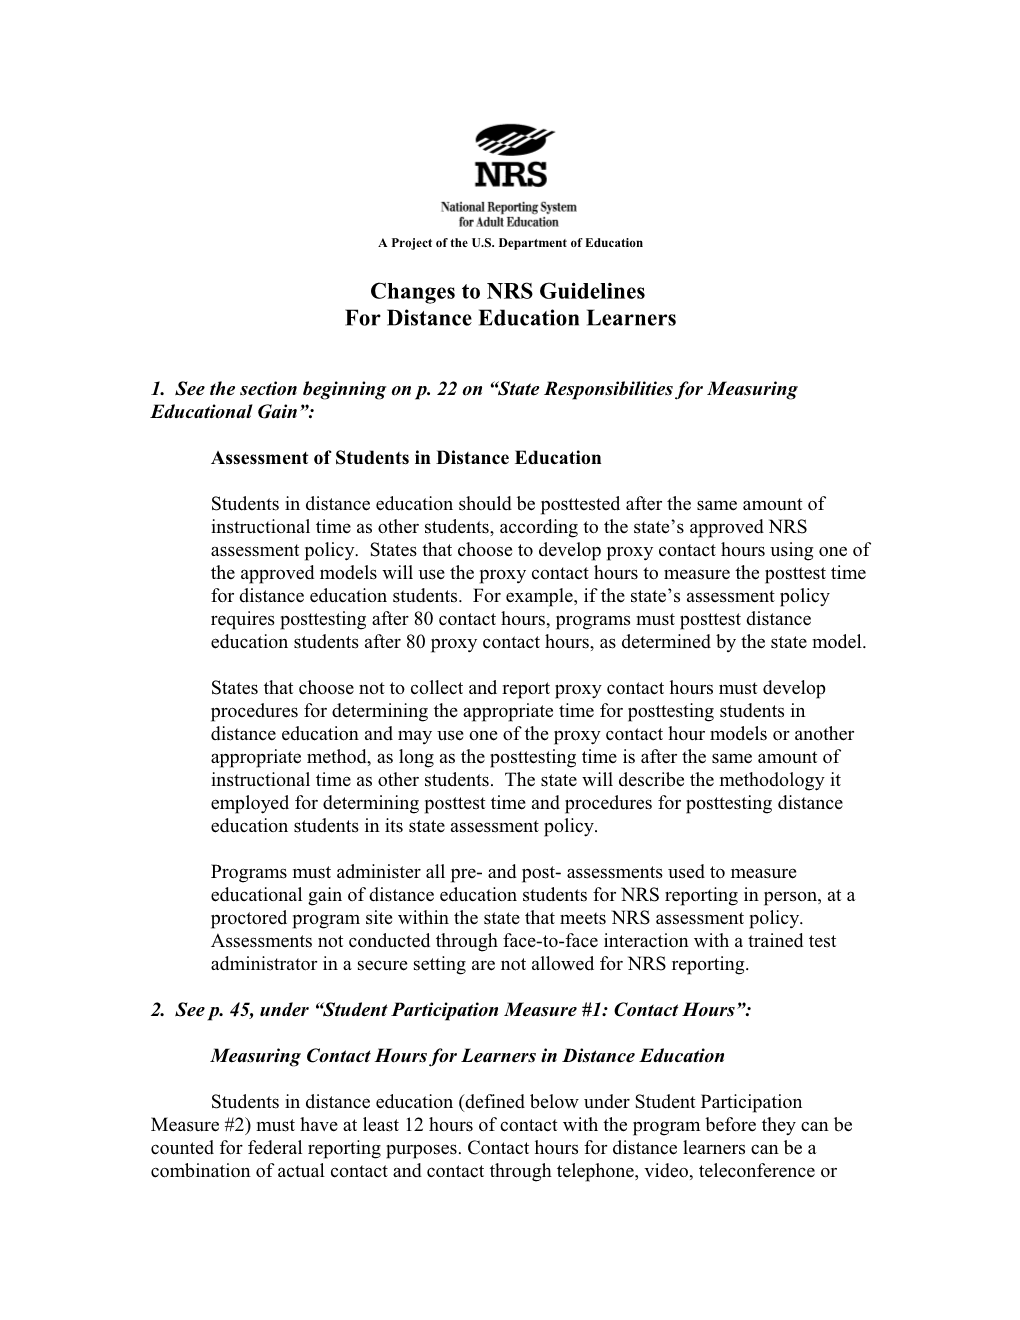 Draft NRS Guidelines for Distance Education